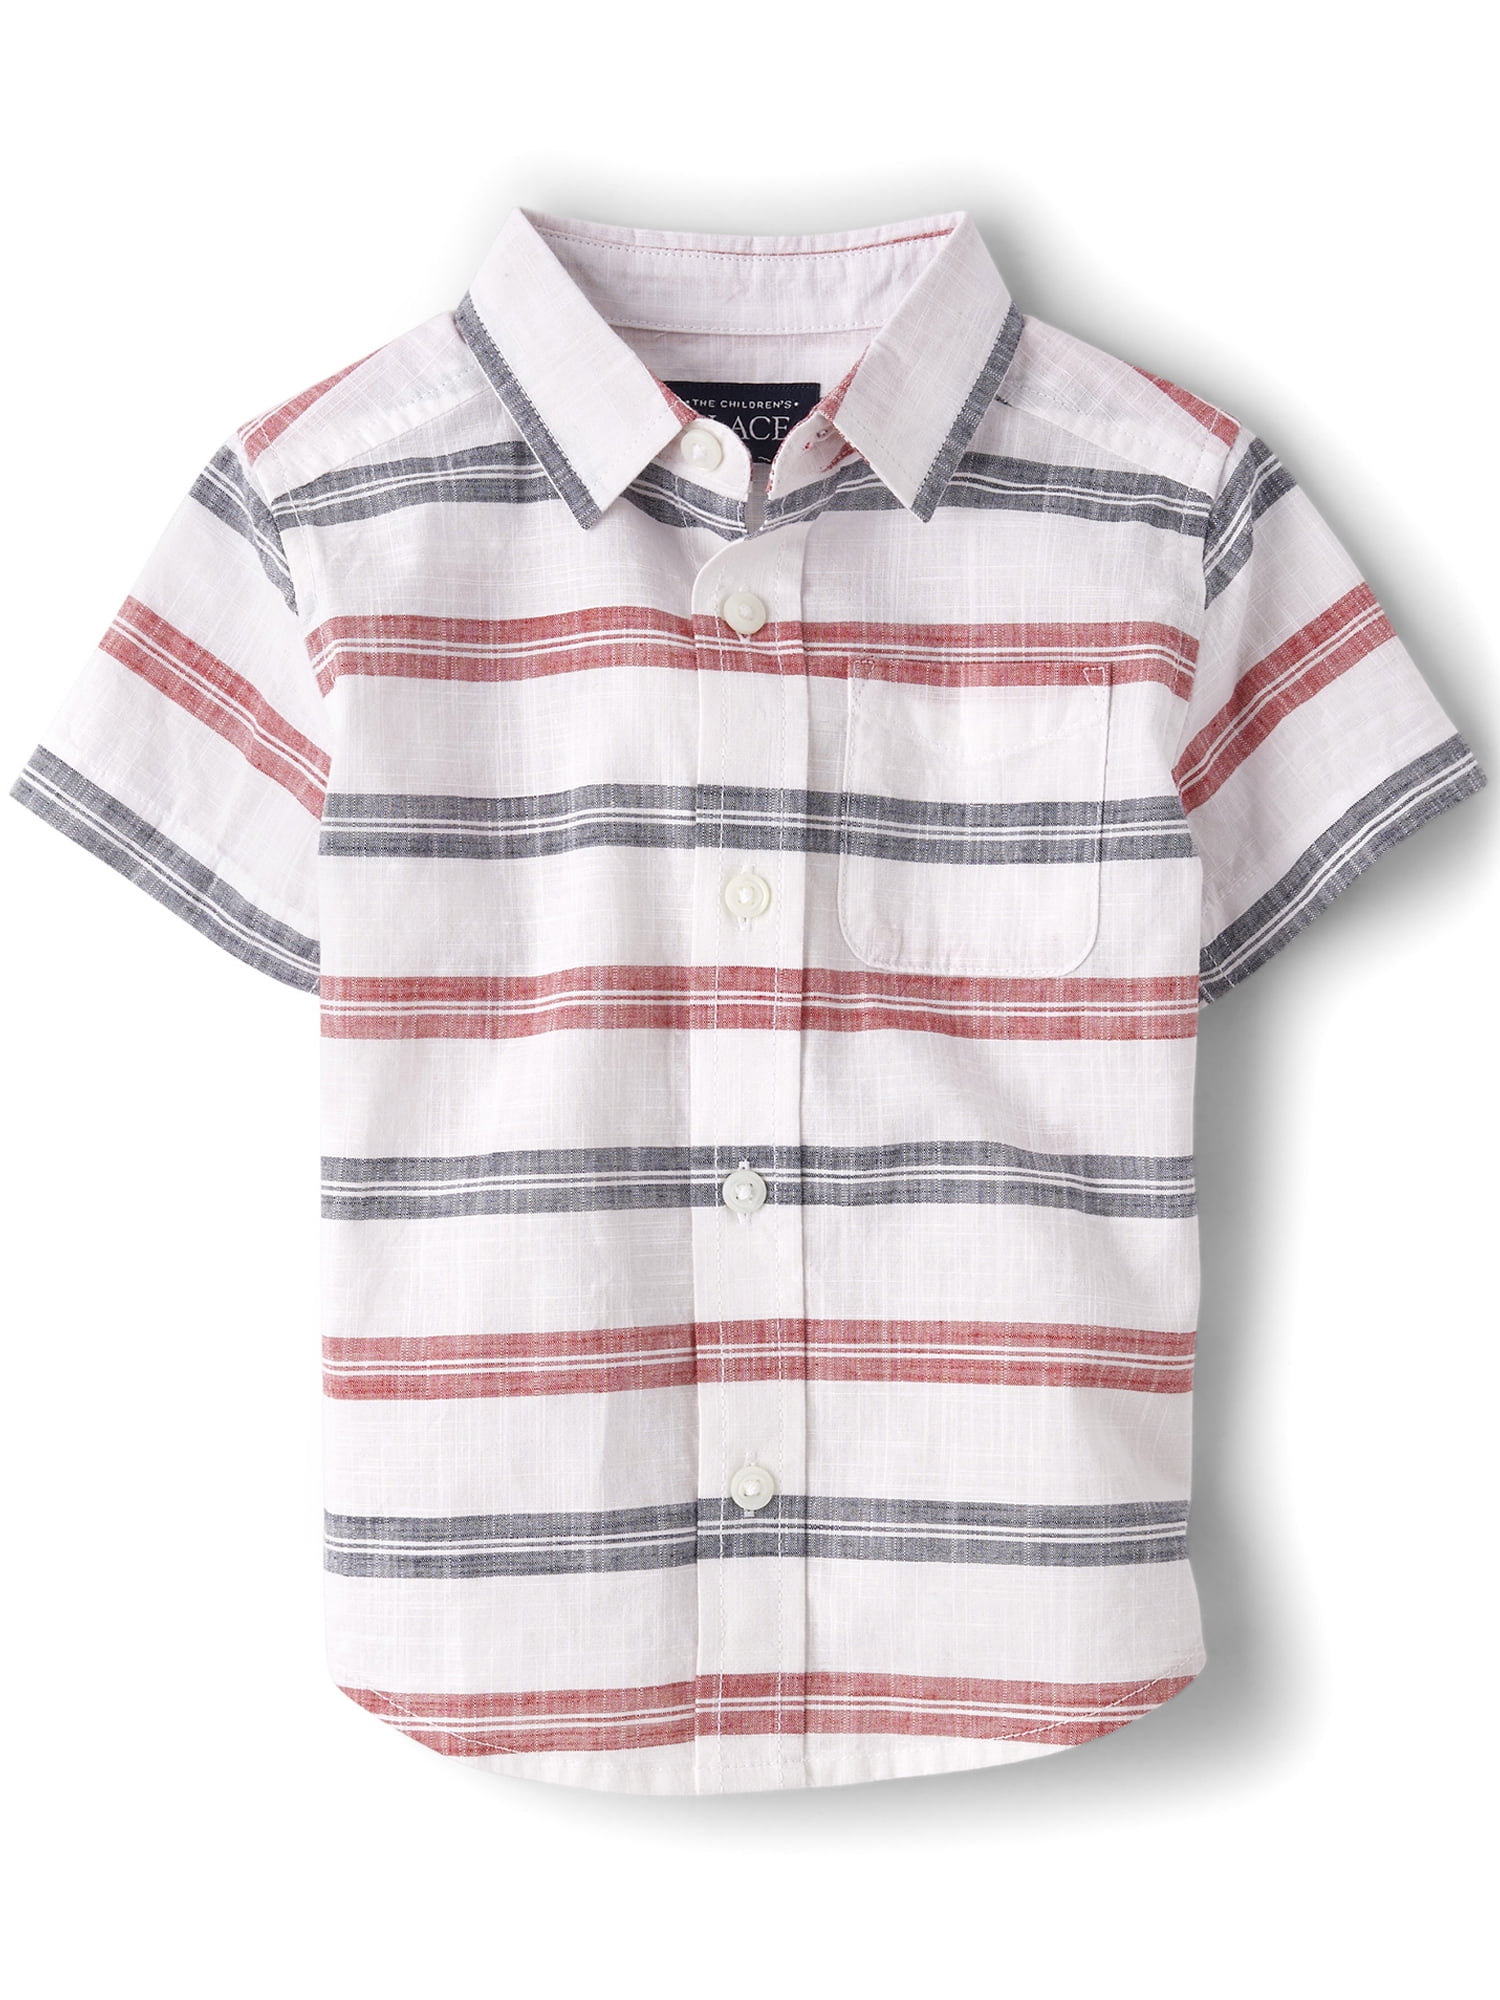 The Children's Place Toddler Boy's Short Sleeve Woven top, Sizes 12M-5T ...